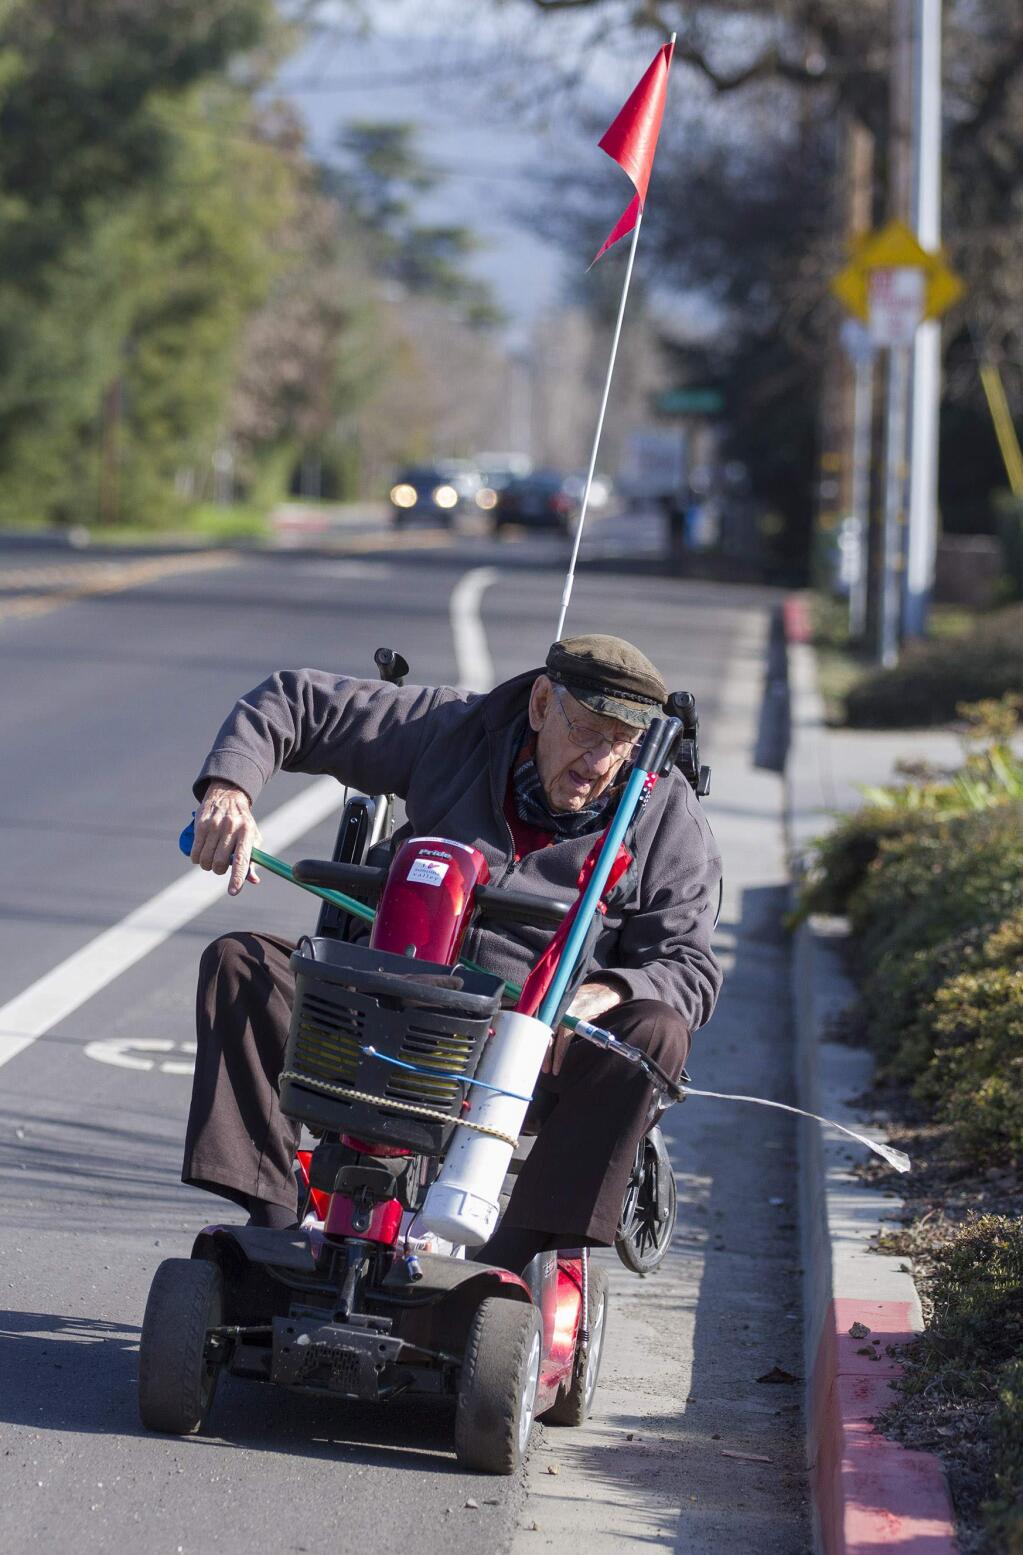 Ken Samuelson, a resident of Sonoma Senior Living on Napa Road, takes his daily scooter stroll and picks up any trash he spots on the busy Sonoma thoroughfares. (Photo by Robbi Pengelly/Index-Tribune)